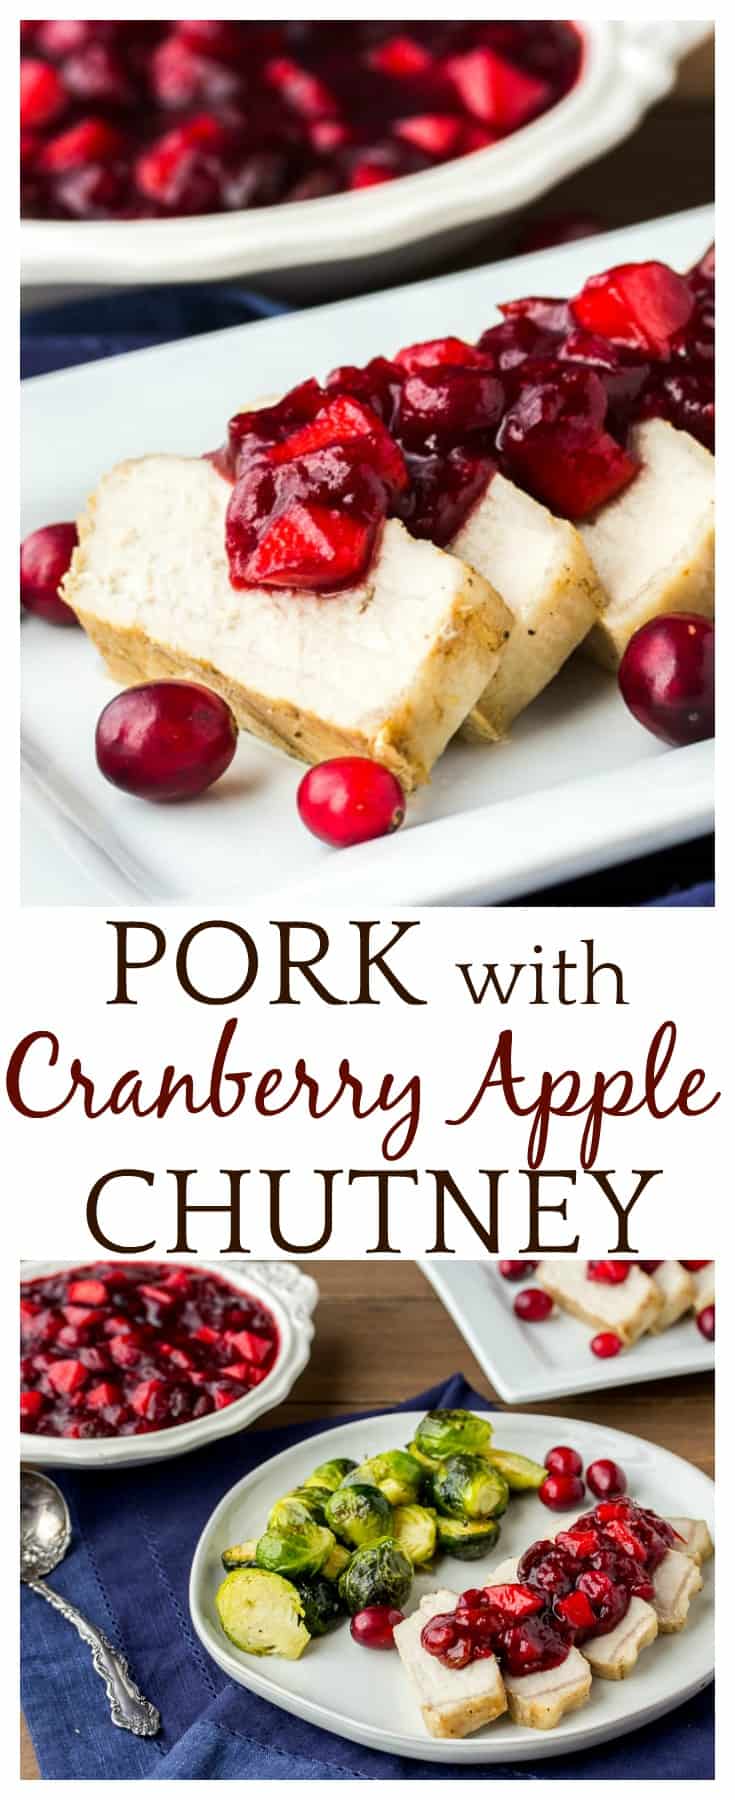 Pork with Cranberry Apple Chutney – savory and sweet ingredients make up this chutney with a splash of Holland House Red Cooking Wine for added depth and flavor. It’s an easy dinner recipe that is perfect for the holiday season! | AD #porkrecipes #cranberryrecipes https://www.pinterest.com/hollandhousecw/ 